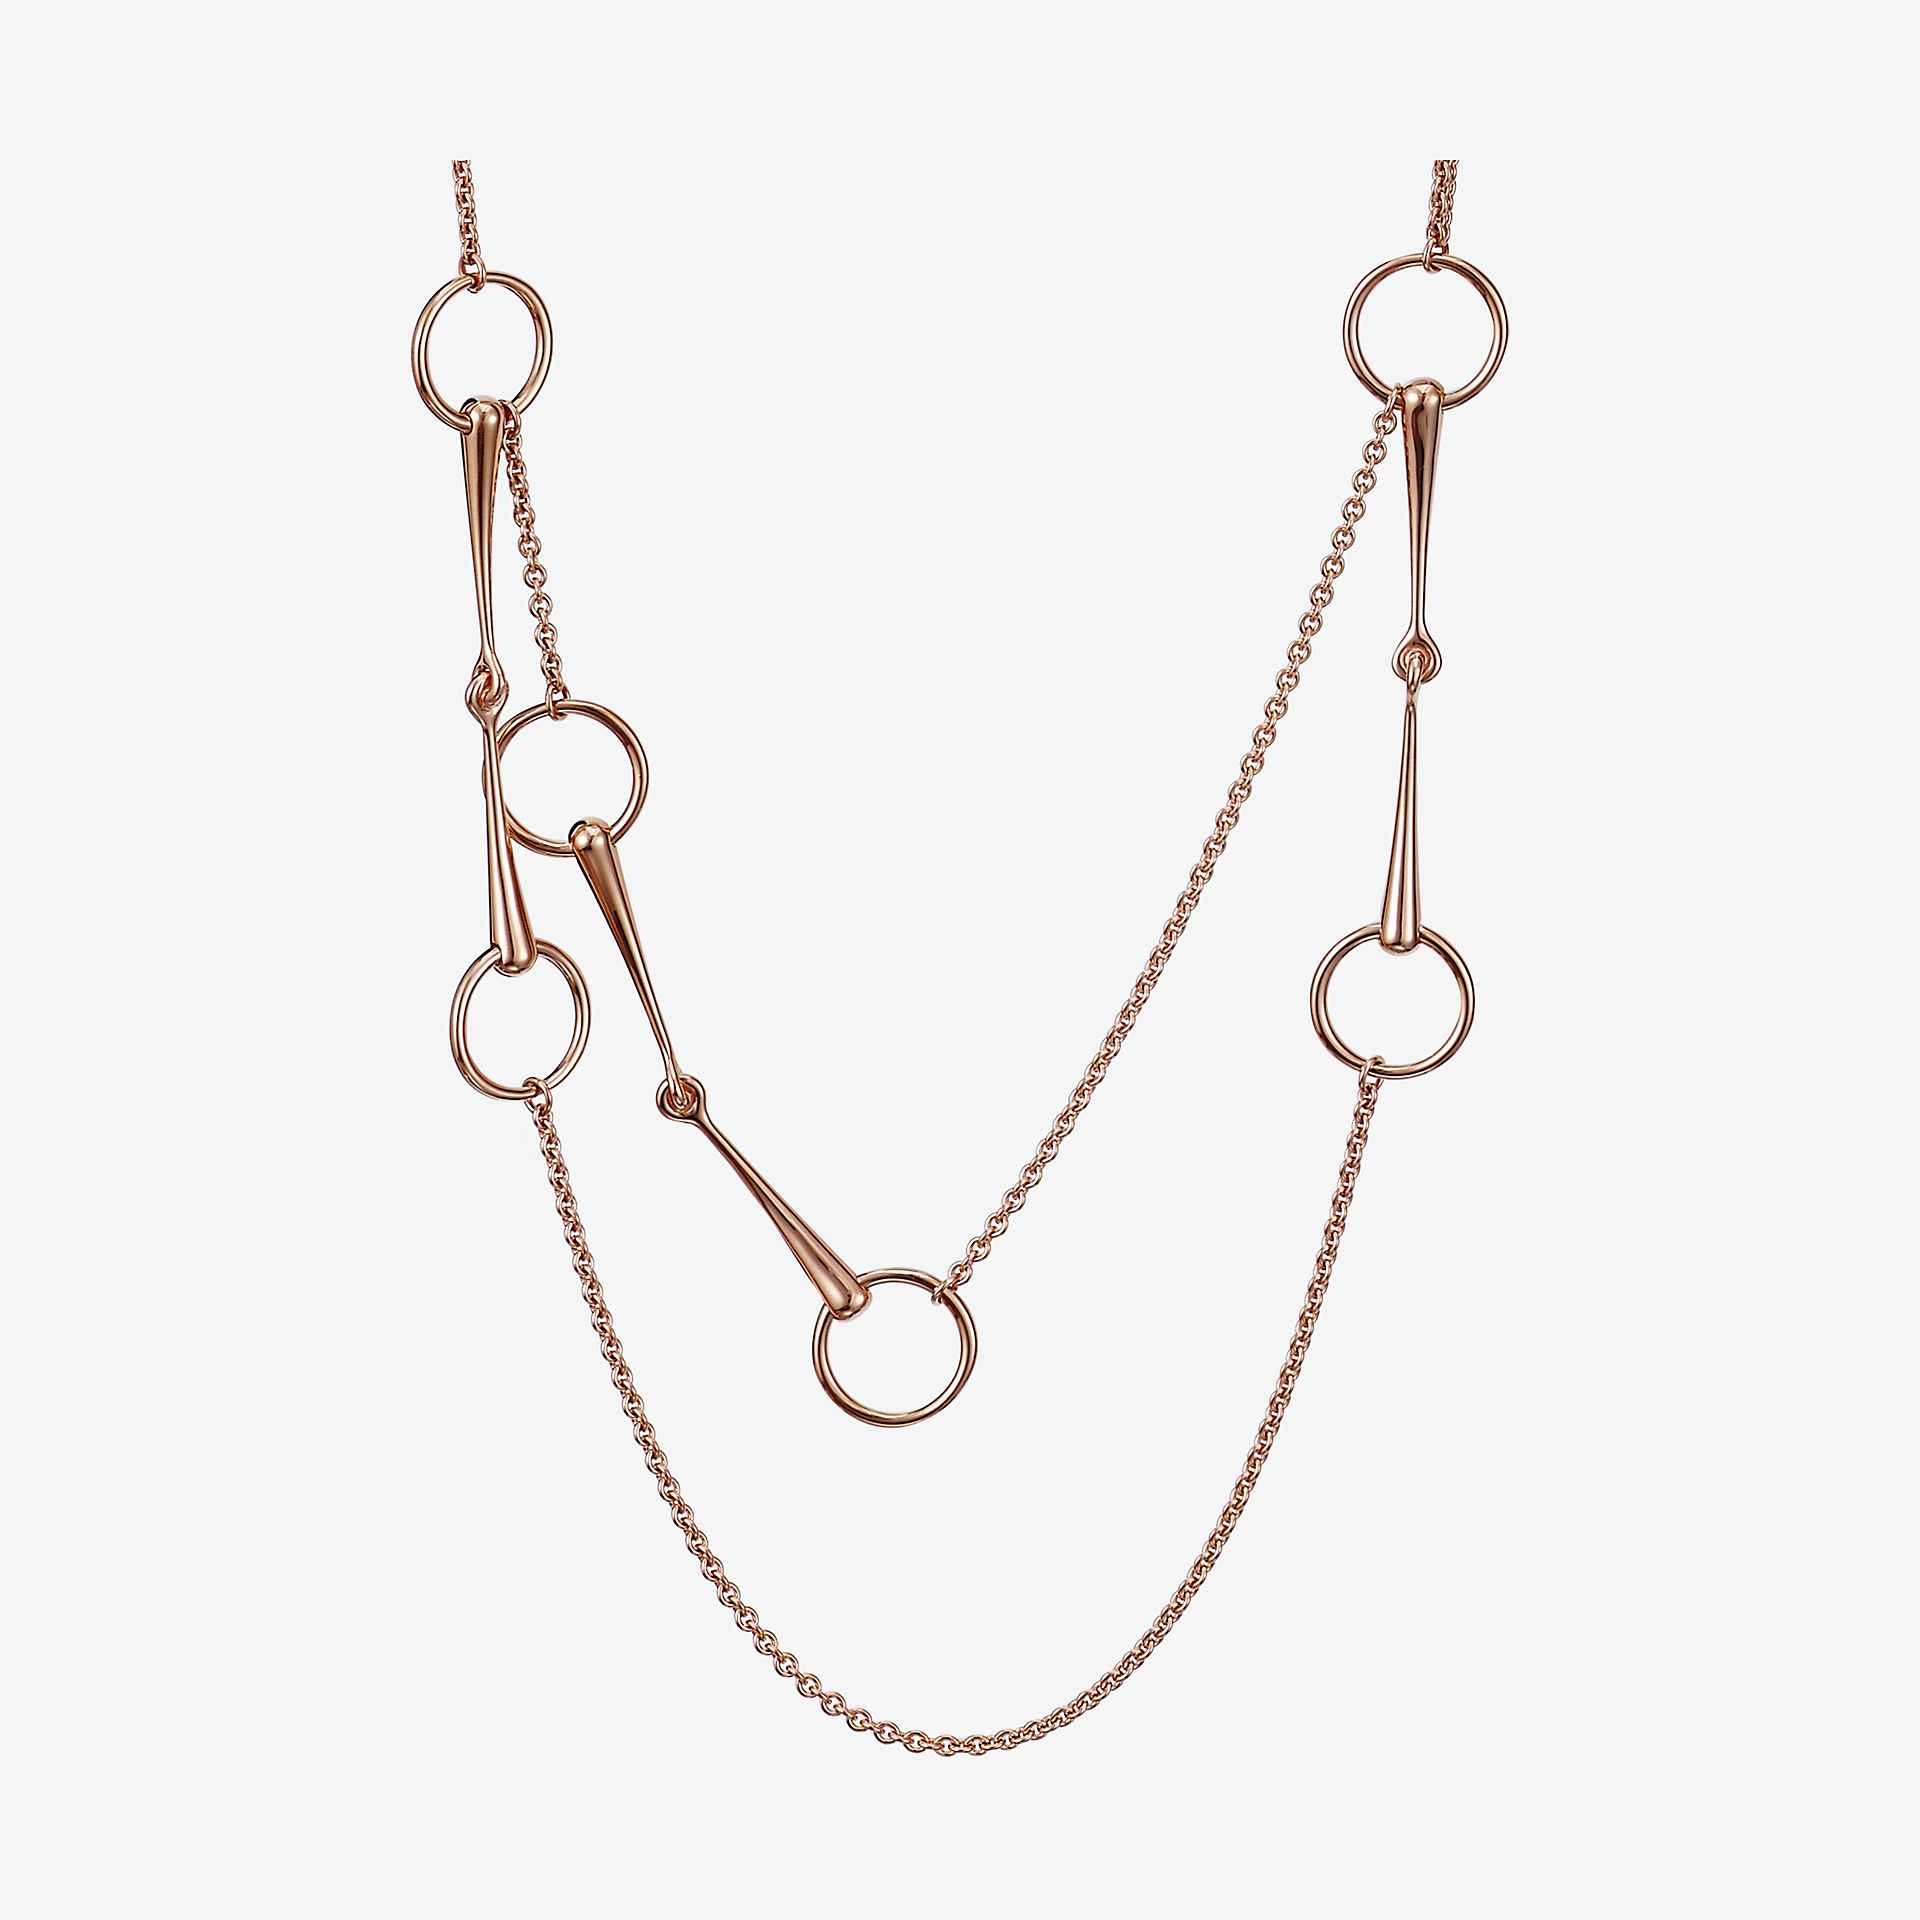 Filet d'Or long necklace, small model